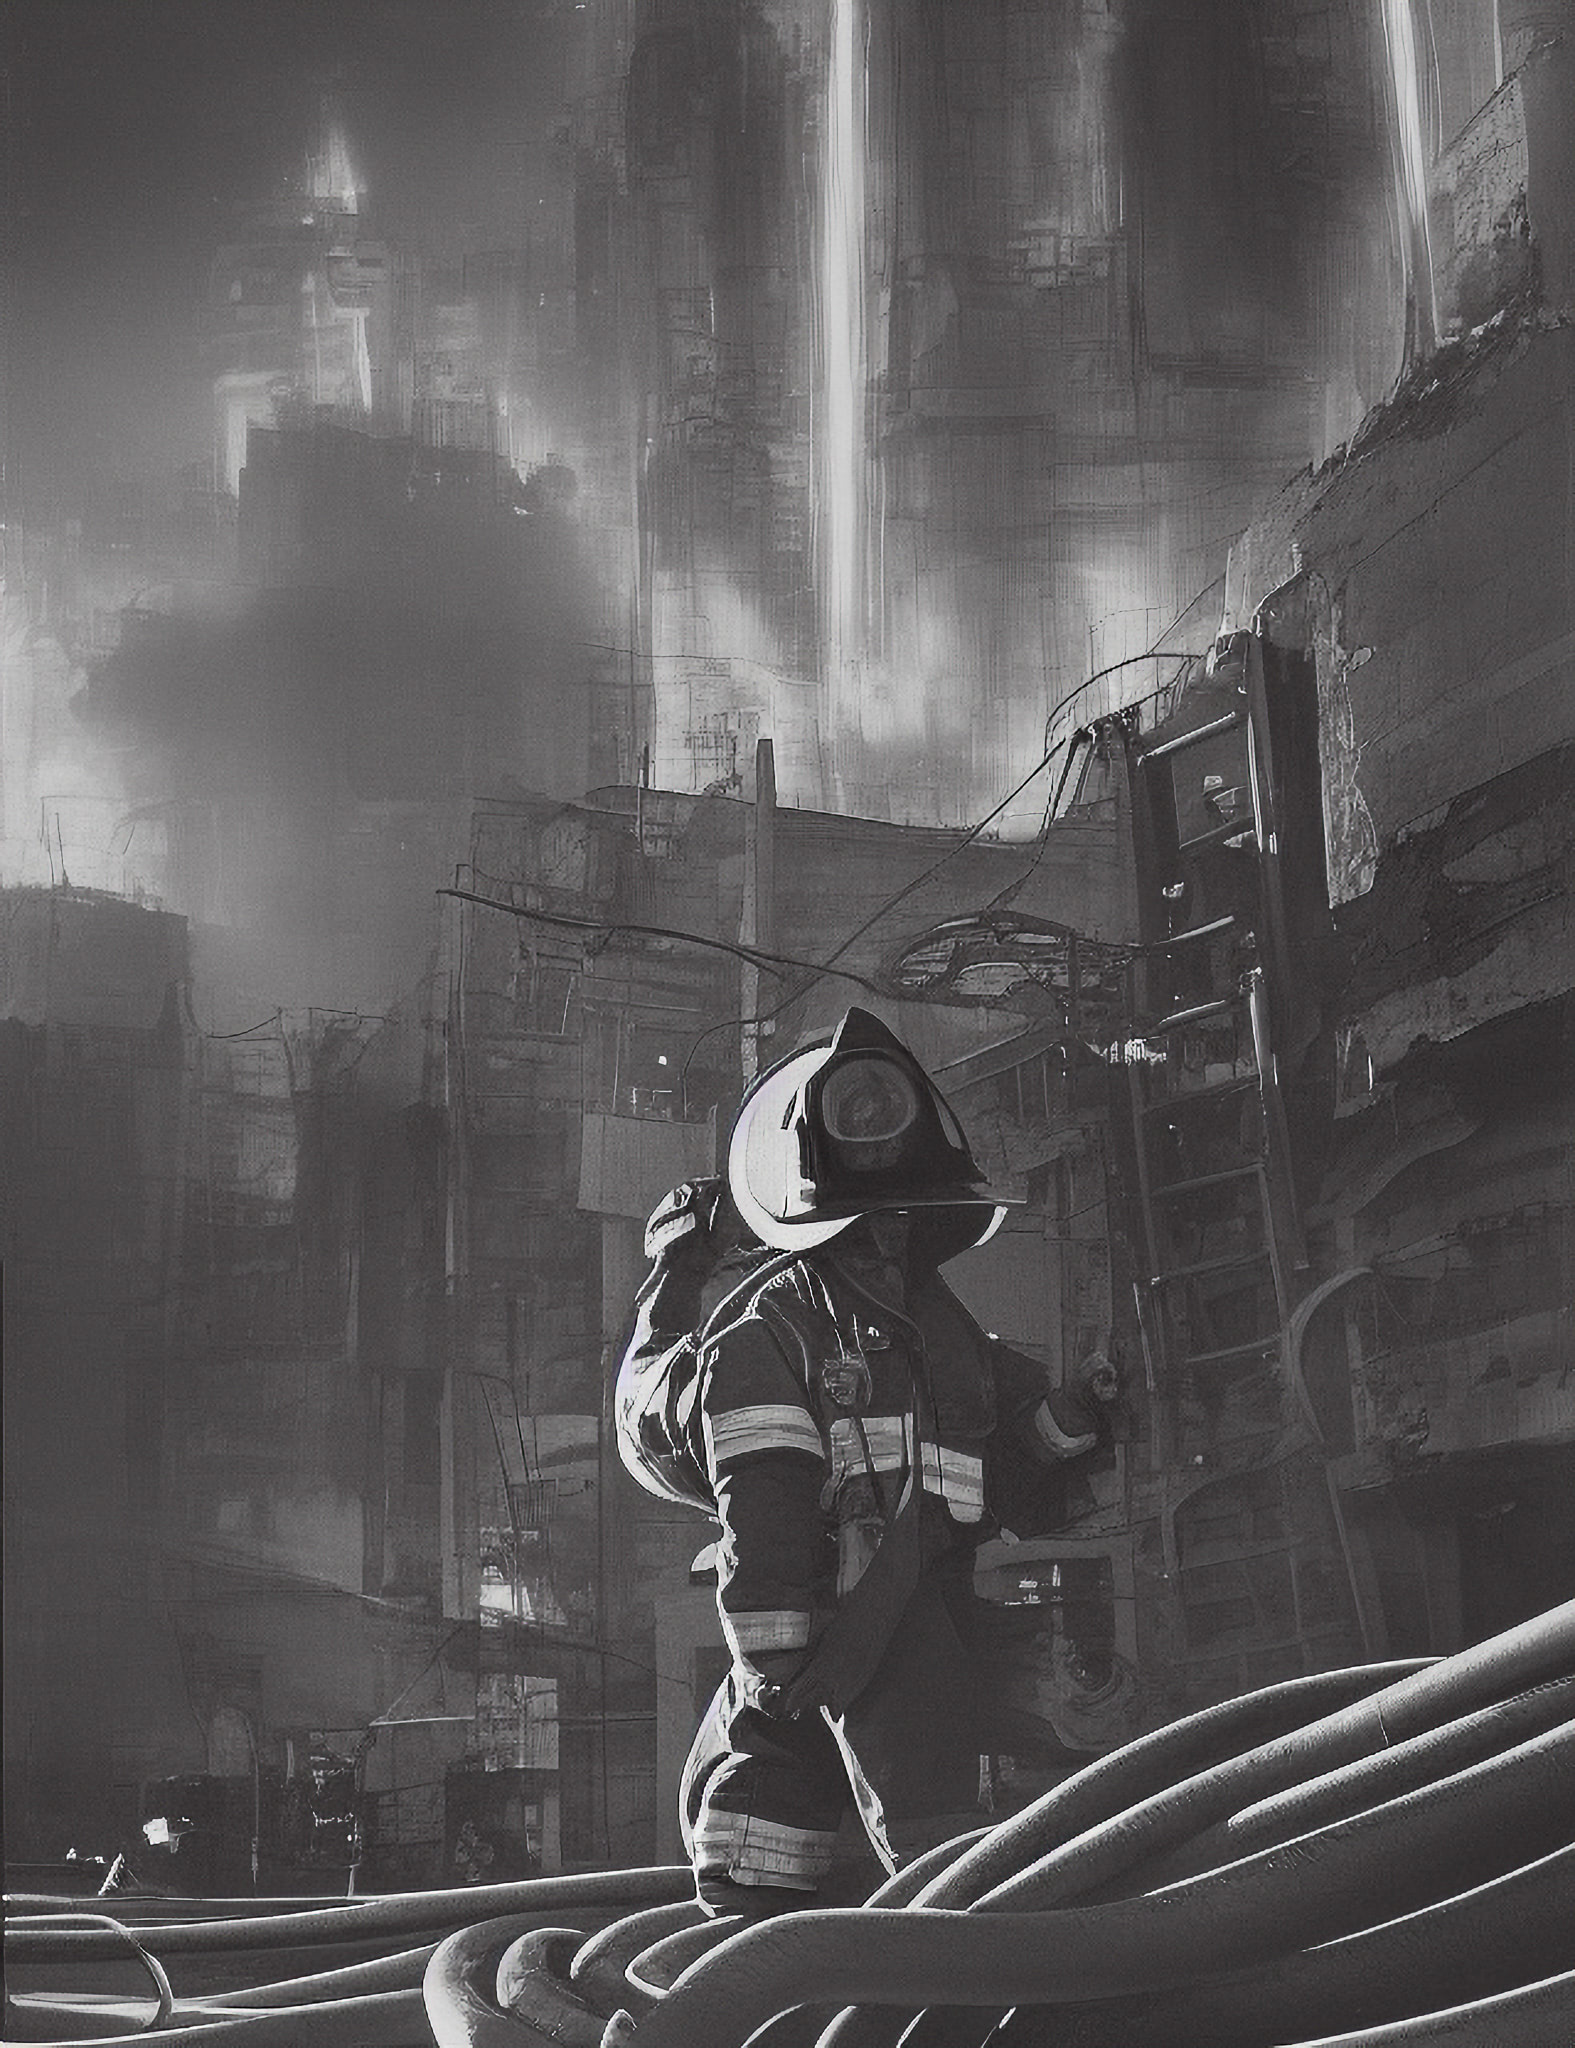 firefighter-working-futuristic-city-1980s-1